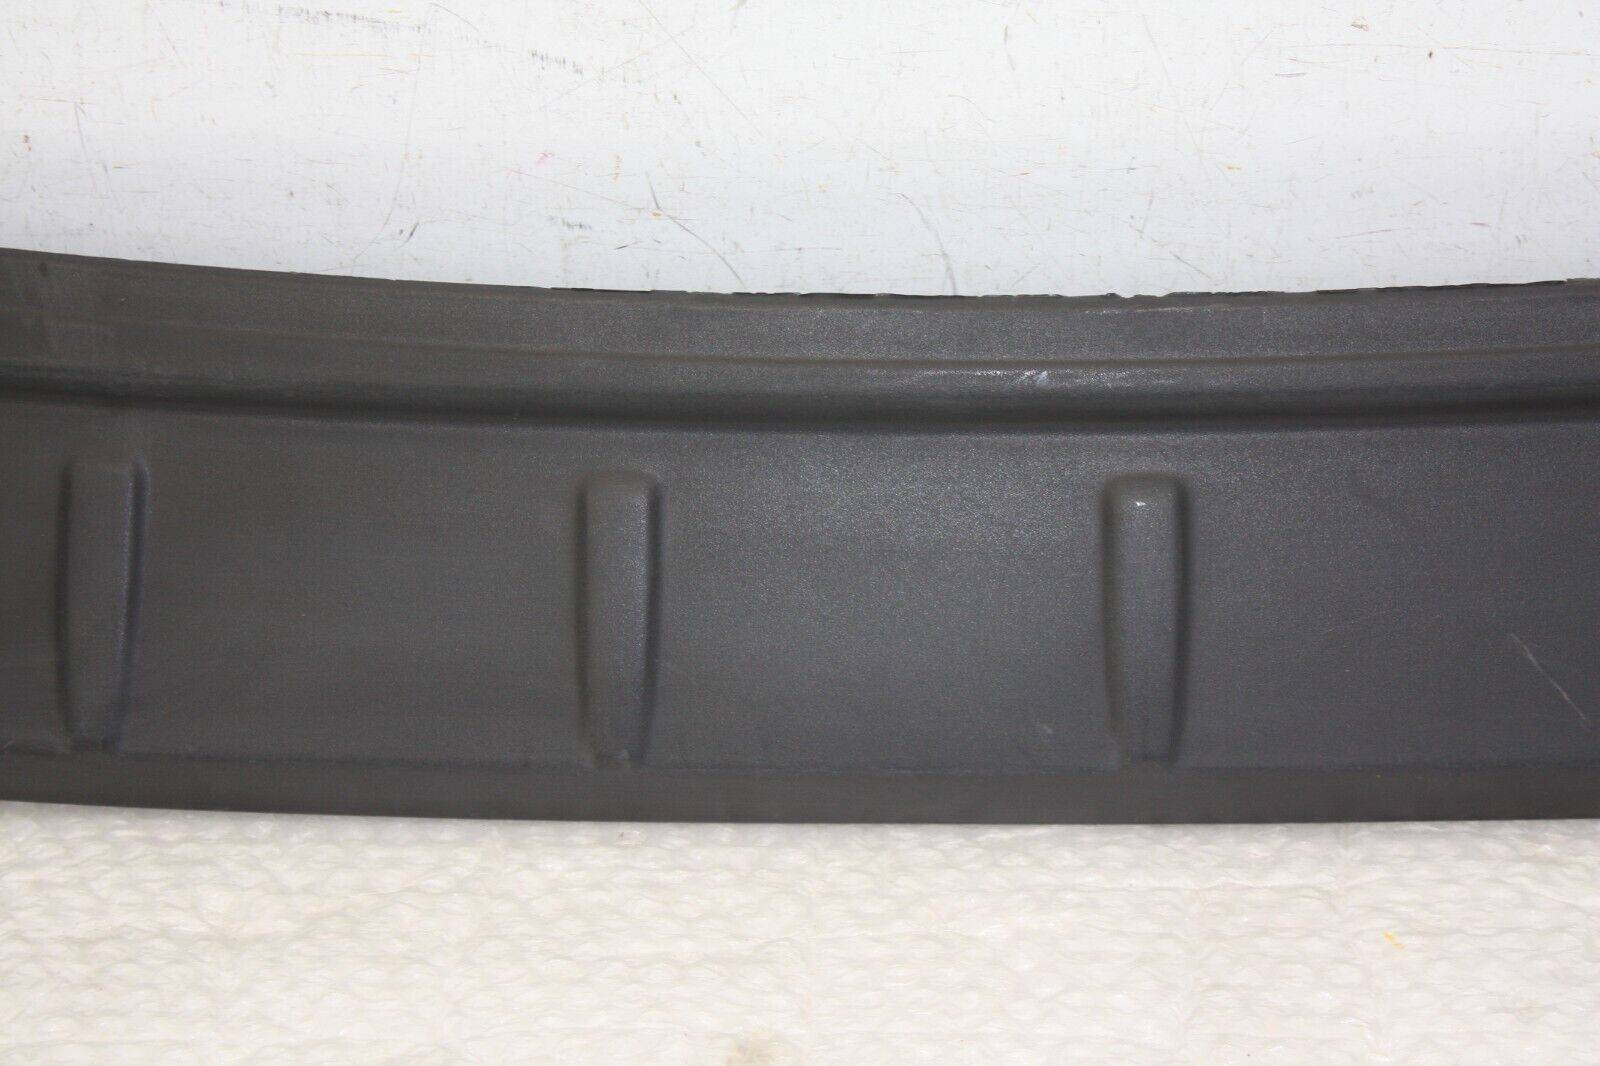 Volvo-XC60-Rear-Bumper-Protection-Cover-30764525-Genuine-FIXING-DAMAGED-176362657810-4